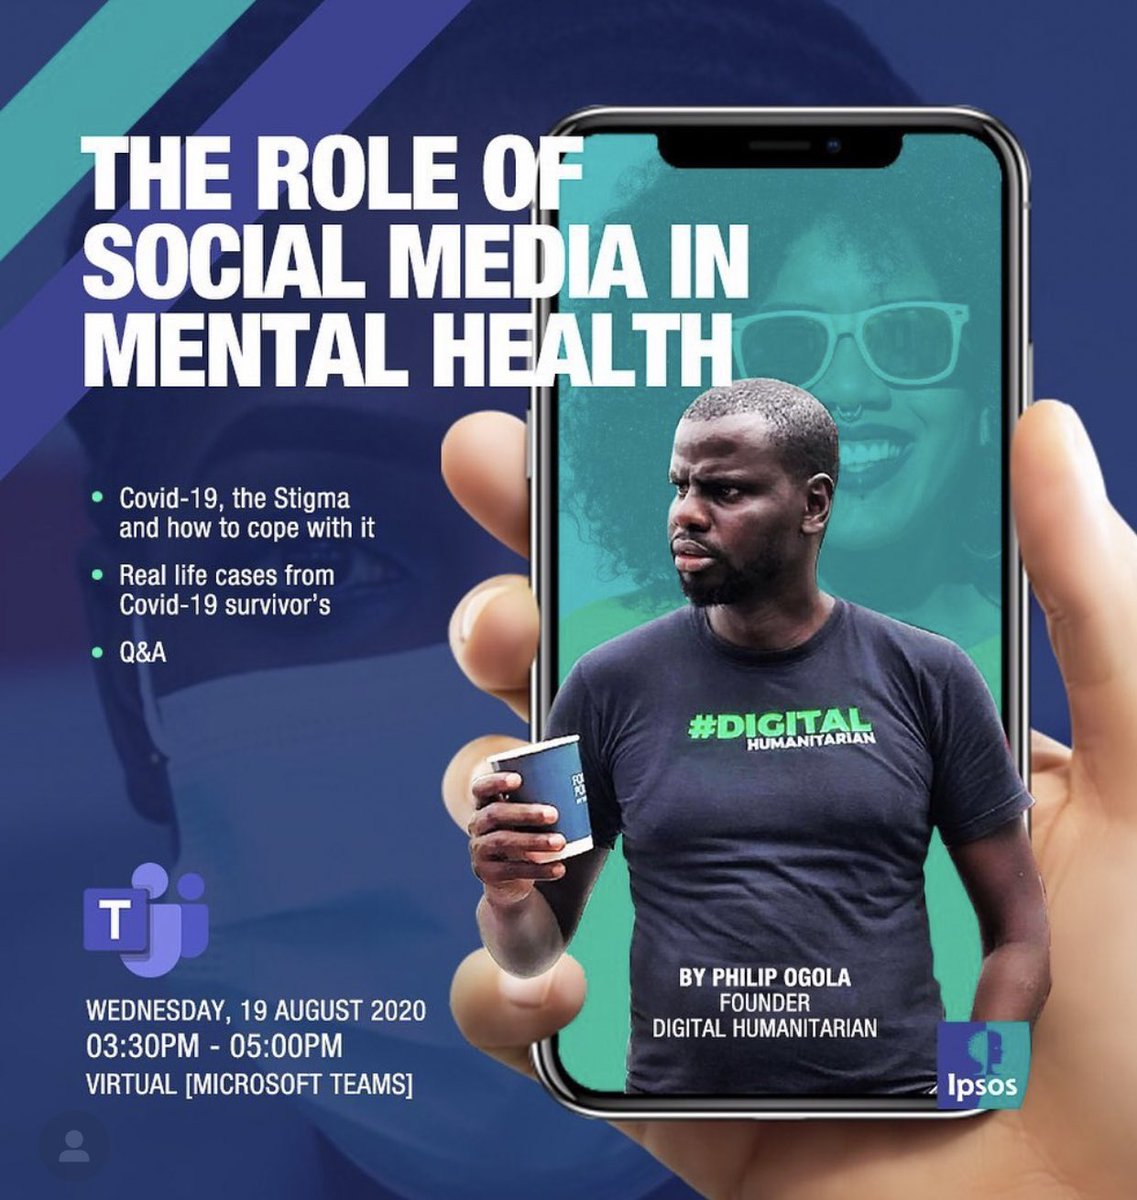 Thanks to  @ZeddyKomen her powerful testimonial battling  #COVID19 has helped many heal.I will continue this thread at a later time, together w/ unsung Heroes we’ve formed  #DigitalHumanitarian  @WhatsApp groups where we respond cases flagged by KOT online  #MashujaaDay